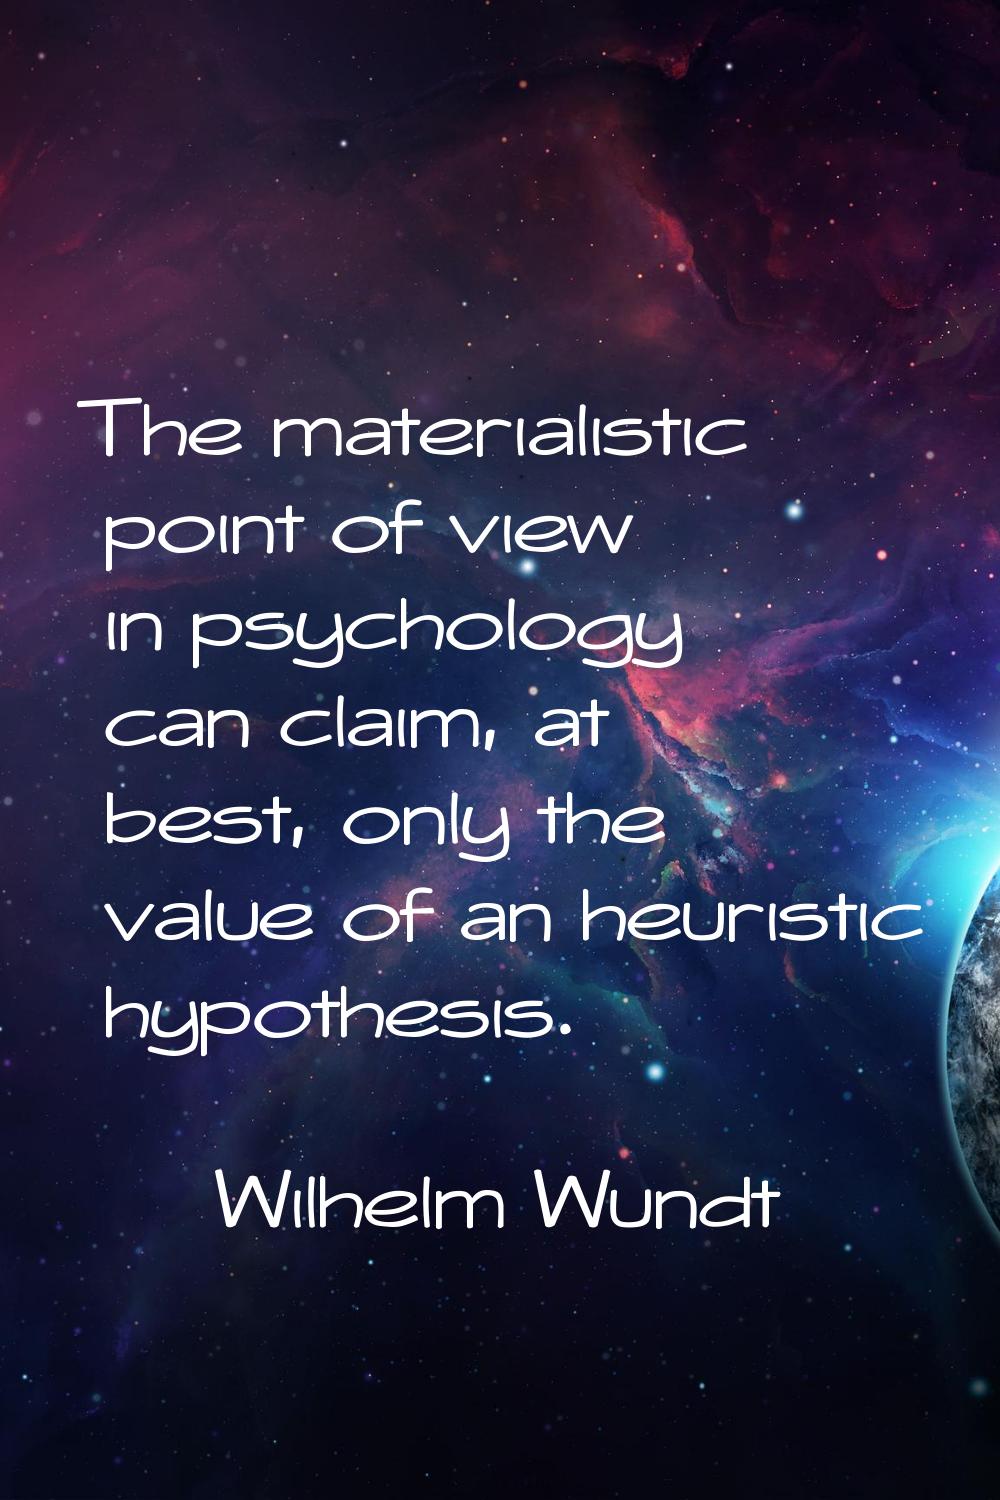 The materialistic point of view in psychology can claim, at best, only the value of an heuristic hy